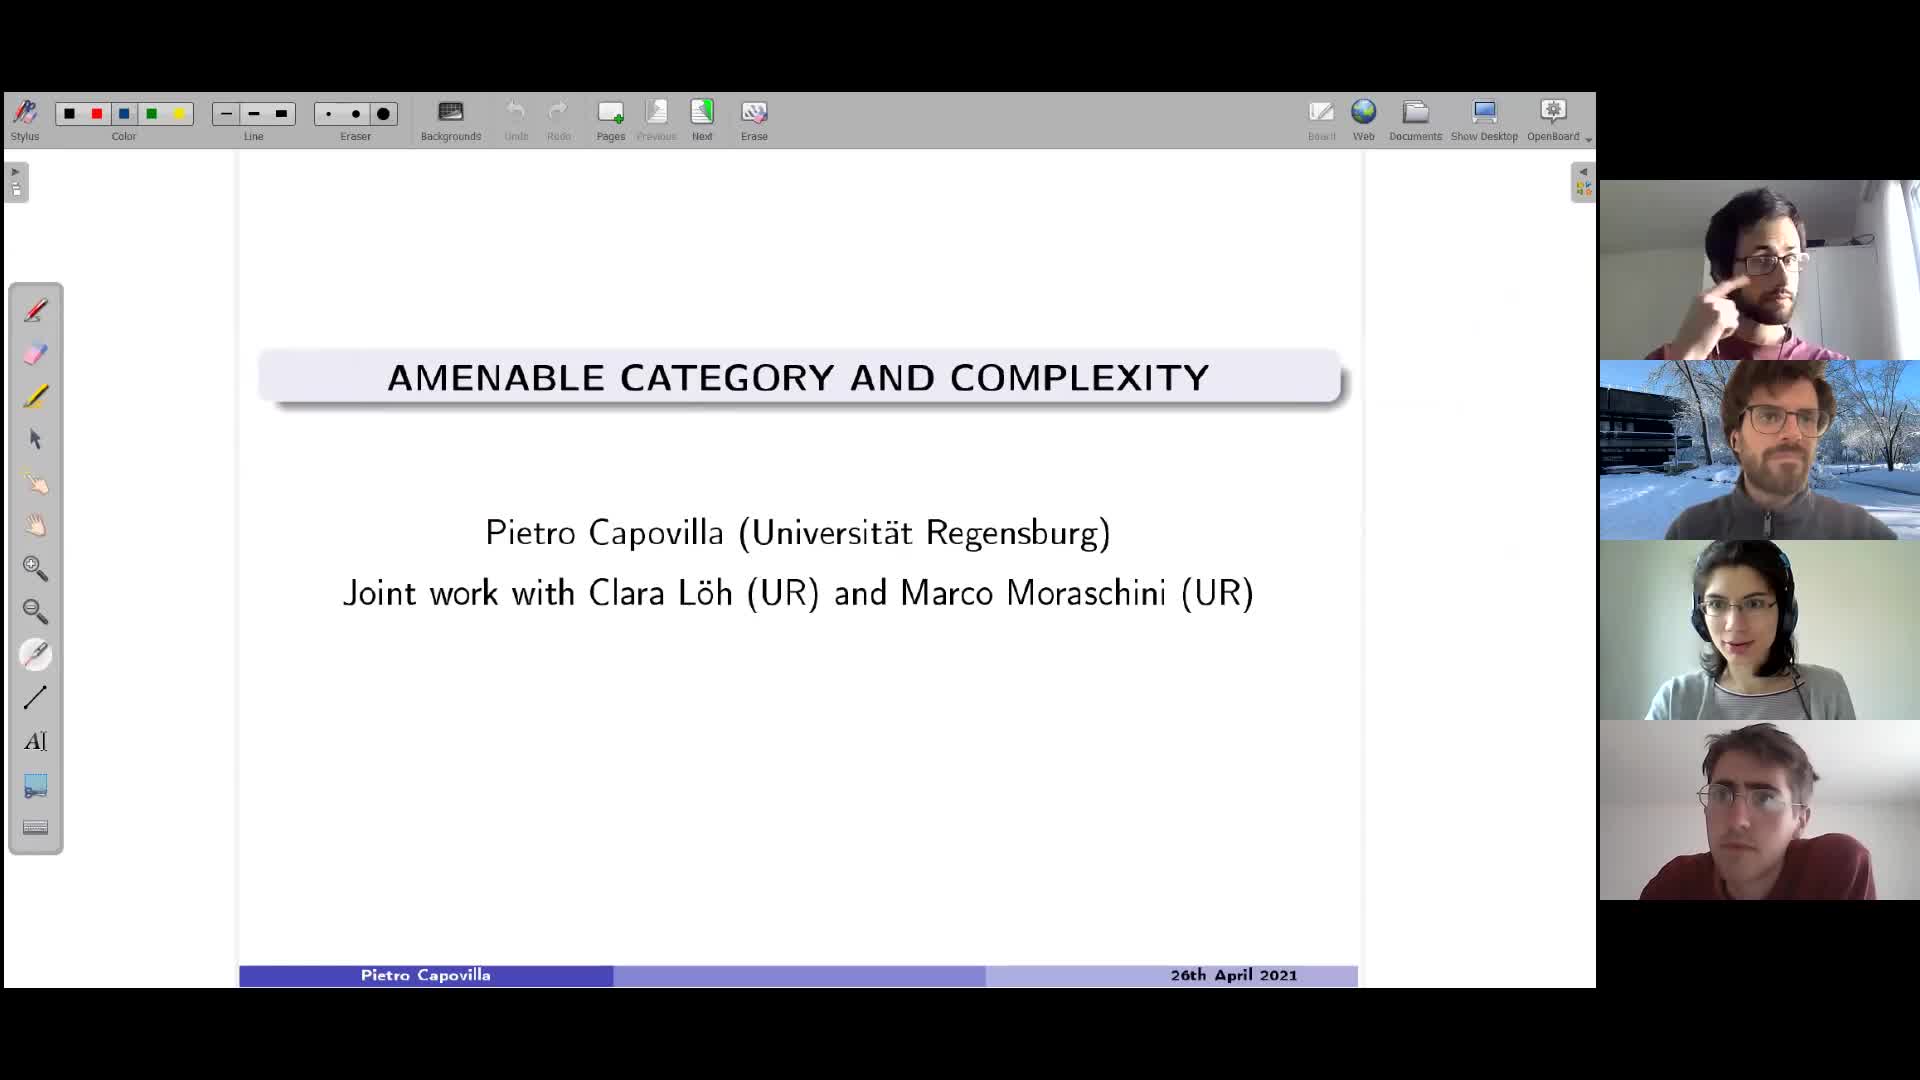 Amenable category and complexity